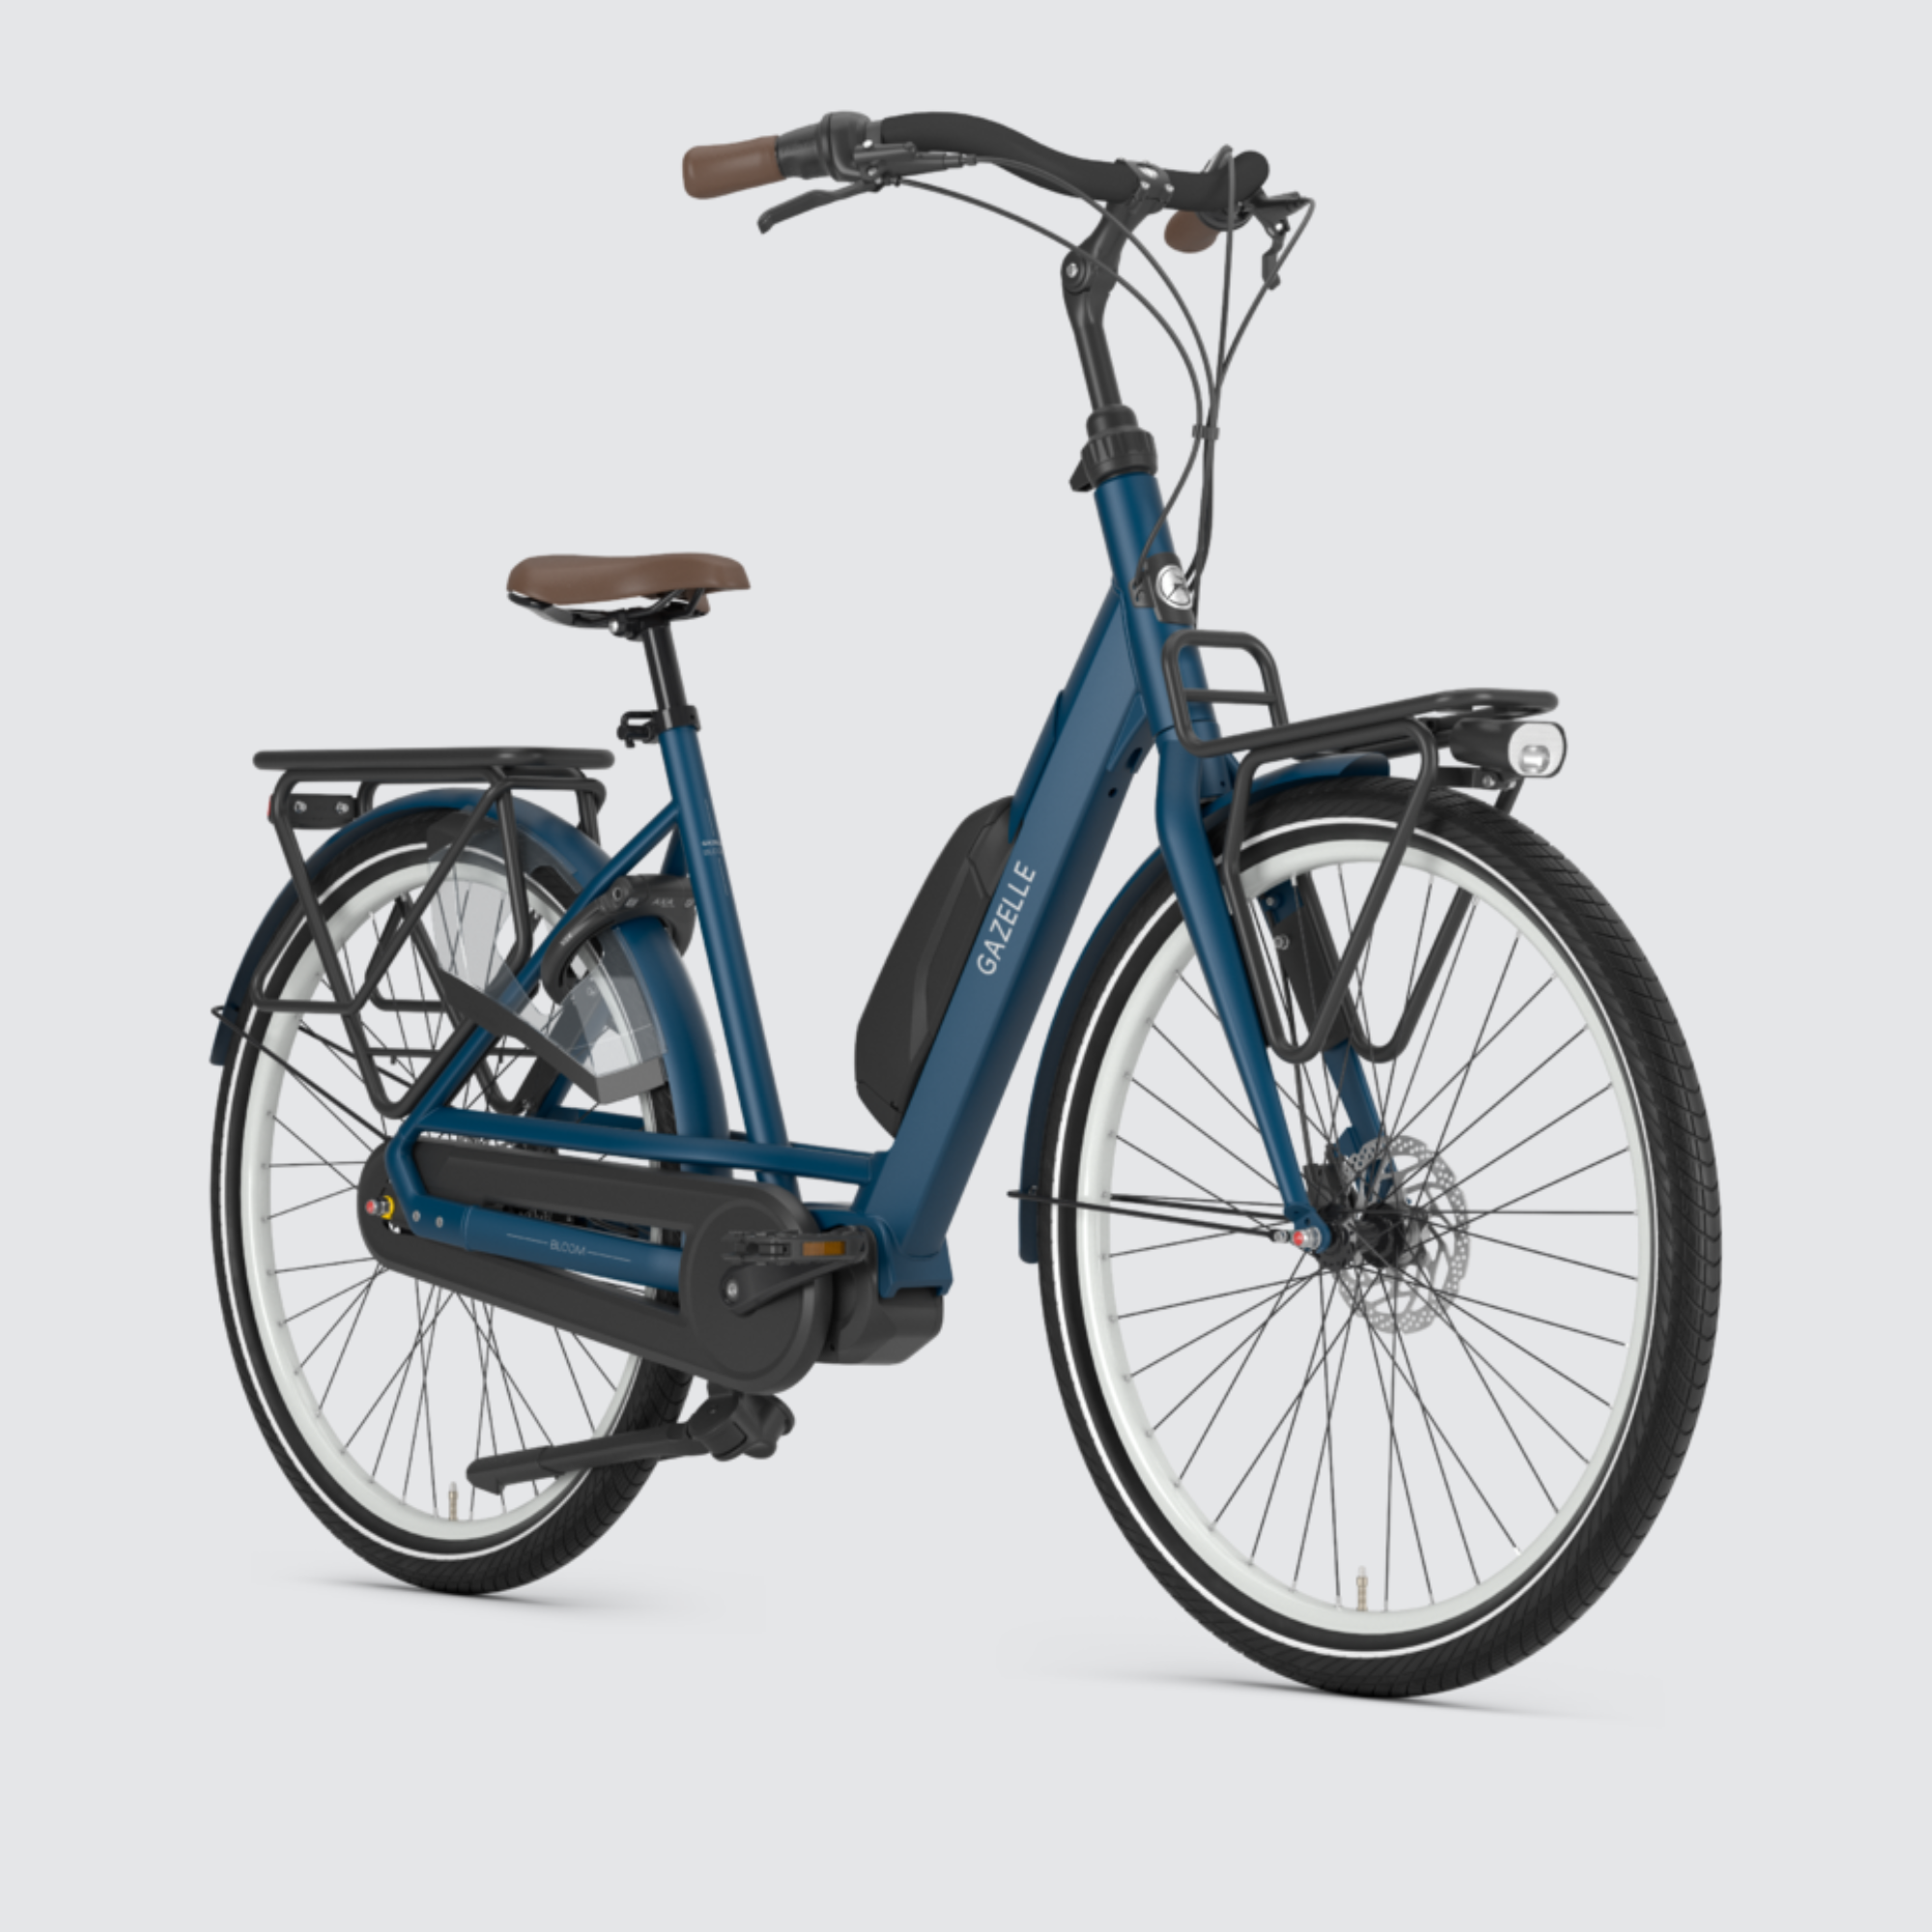 Angled view of the Gazelle Bloom C7 HMS Electric Bike in Mallard Blue – A perfect blend of style and family-friendly functionality for your everyday adventures.